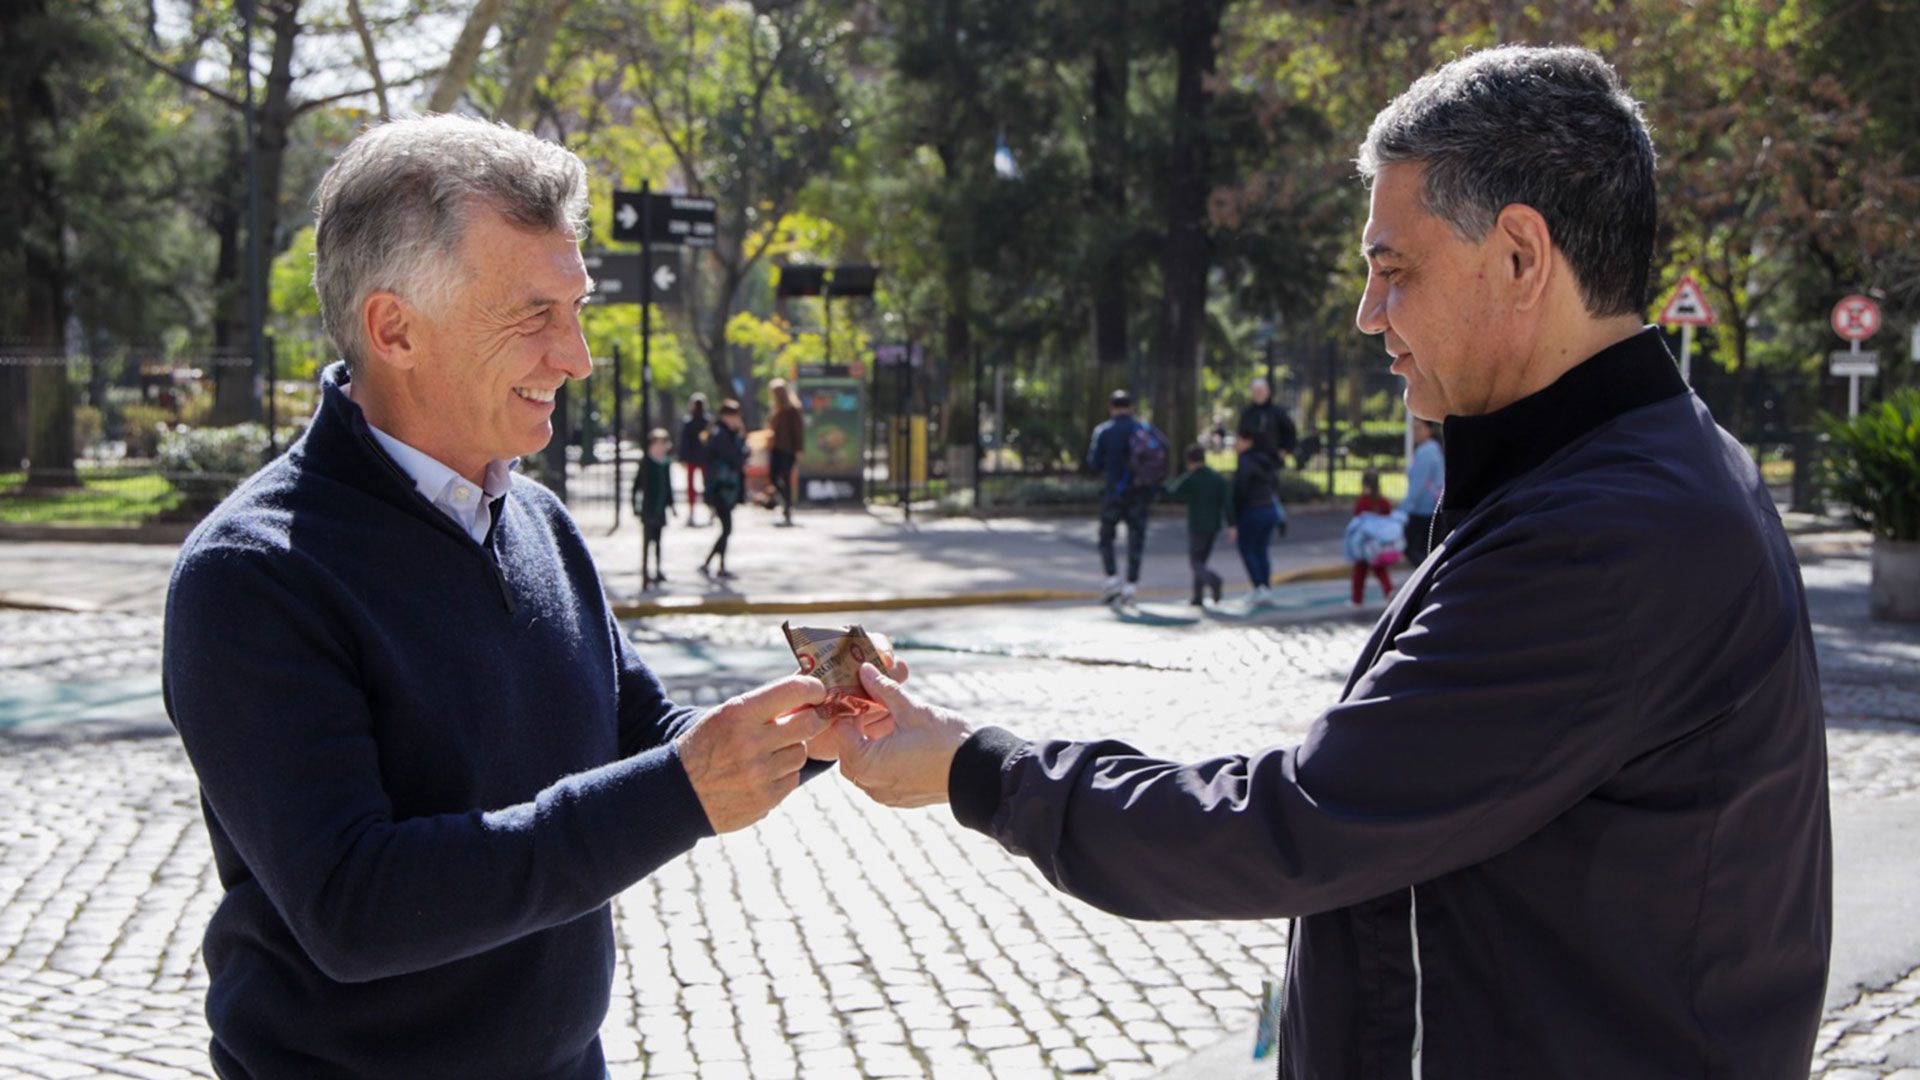 Mauricio Macri got fully involved in the Buenos Aires campaign and toured the Belgrano neighborhood with Jorge Macri